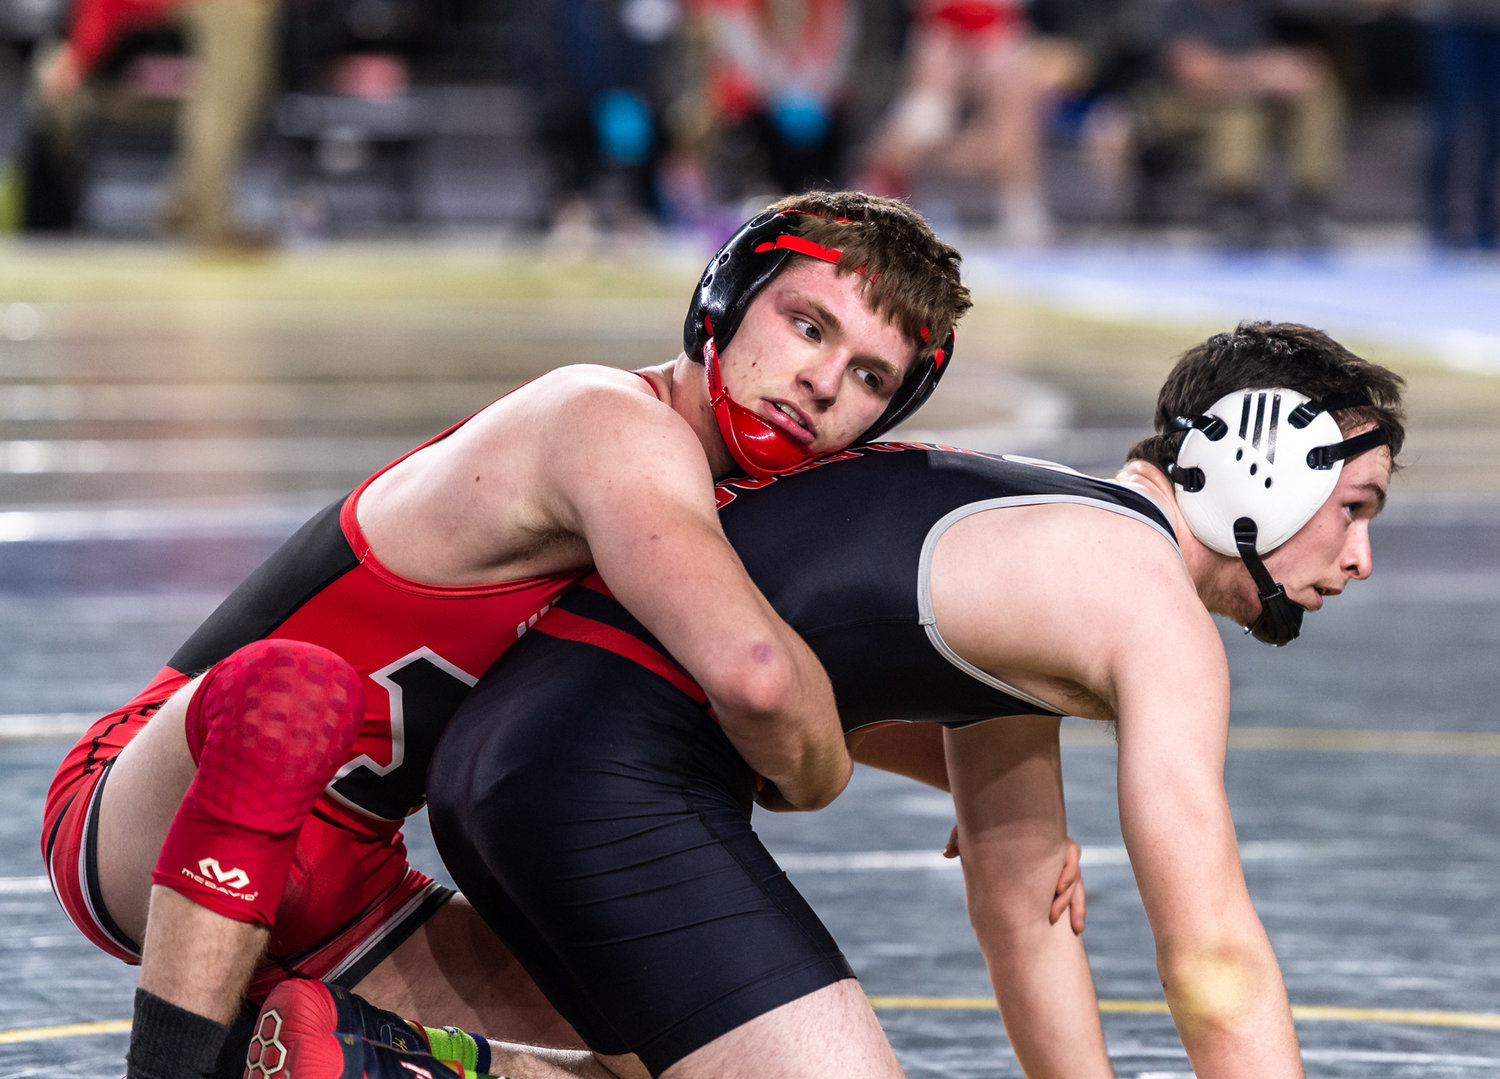 Yelm’s Lake Harris, 145 pounds, competes against North Central’s Tommy Elliott at Mat Classic XXXIV on Friday, February 17, 2023, at the Tacoma Dome. (Joshua Hart/For The Chronicle)